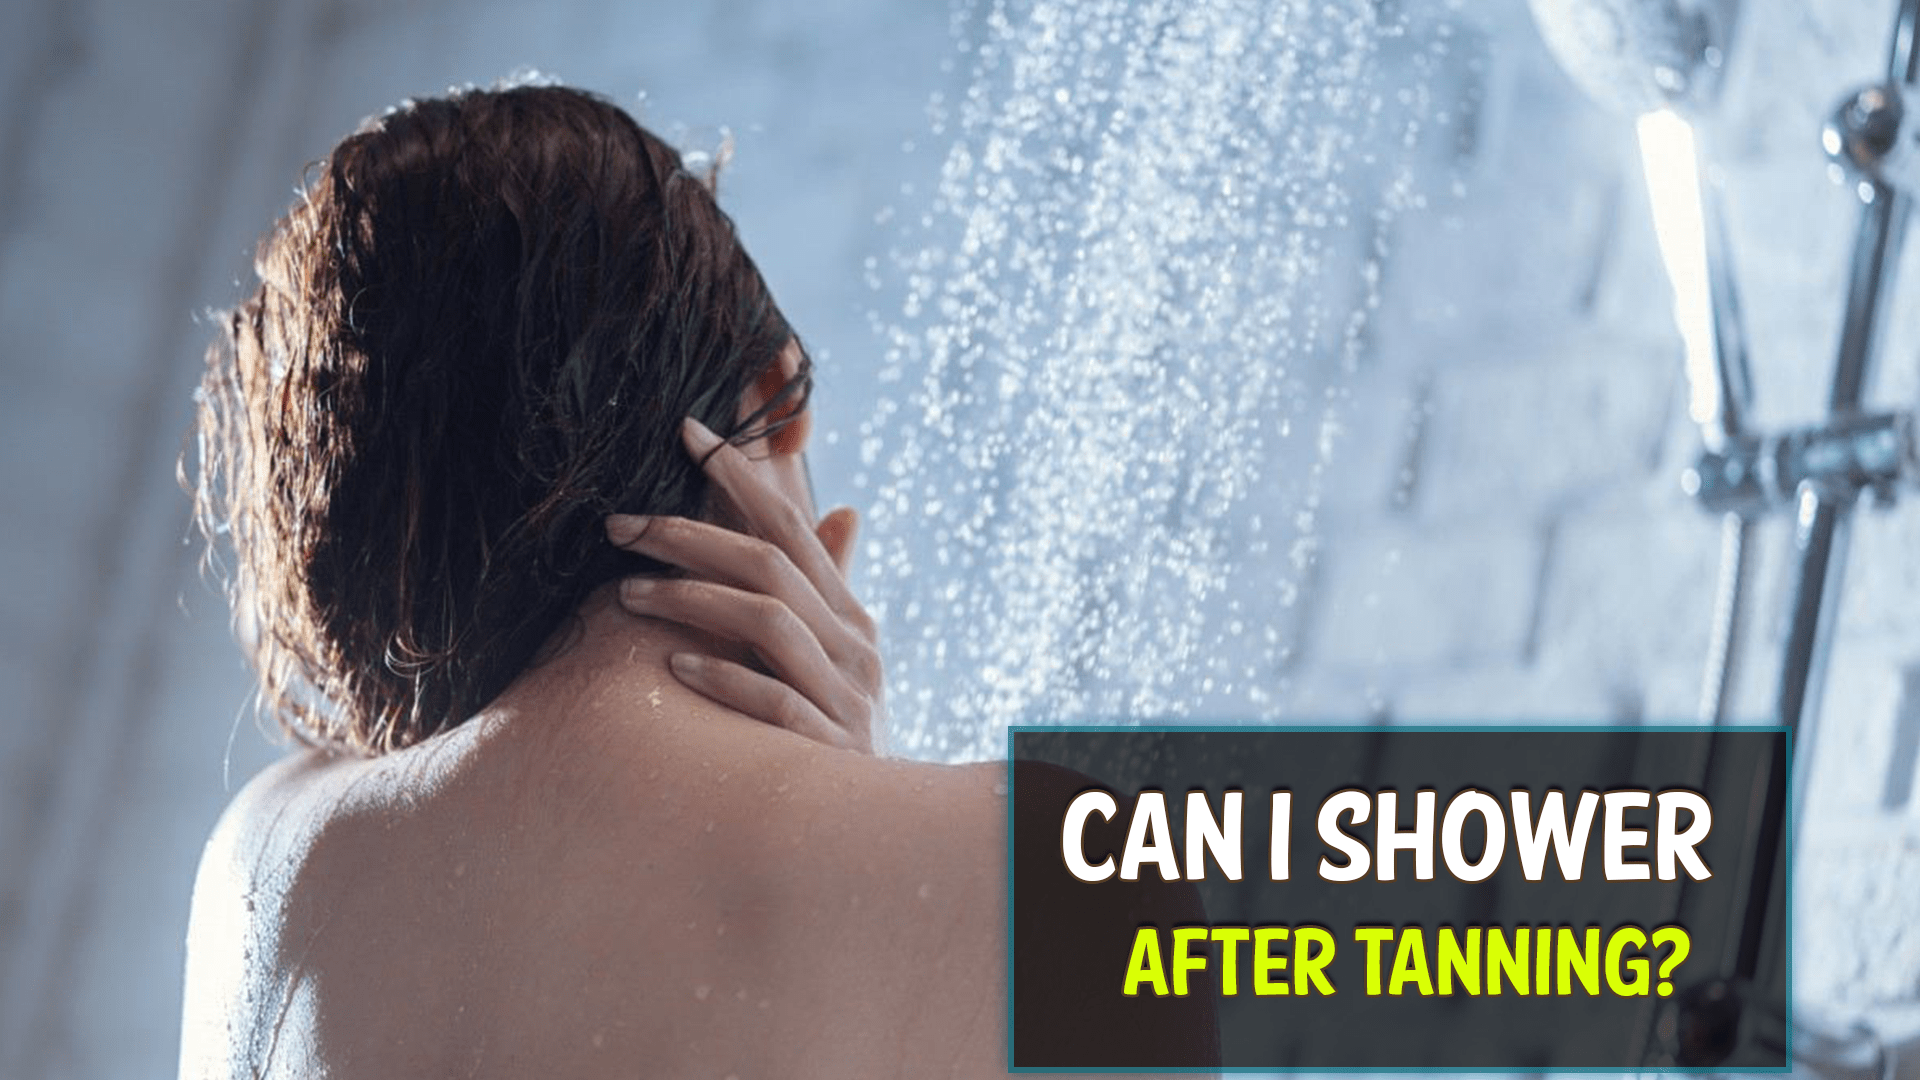 How Long Should You Wait To Shower After Tanning